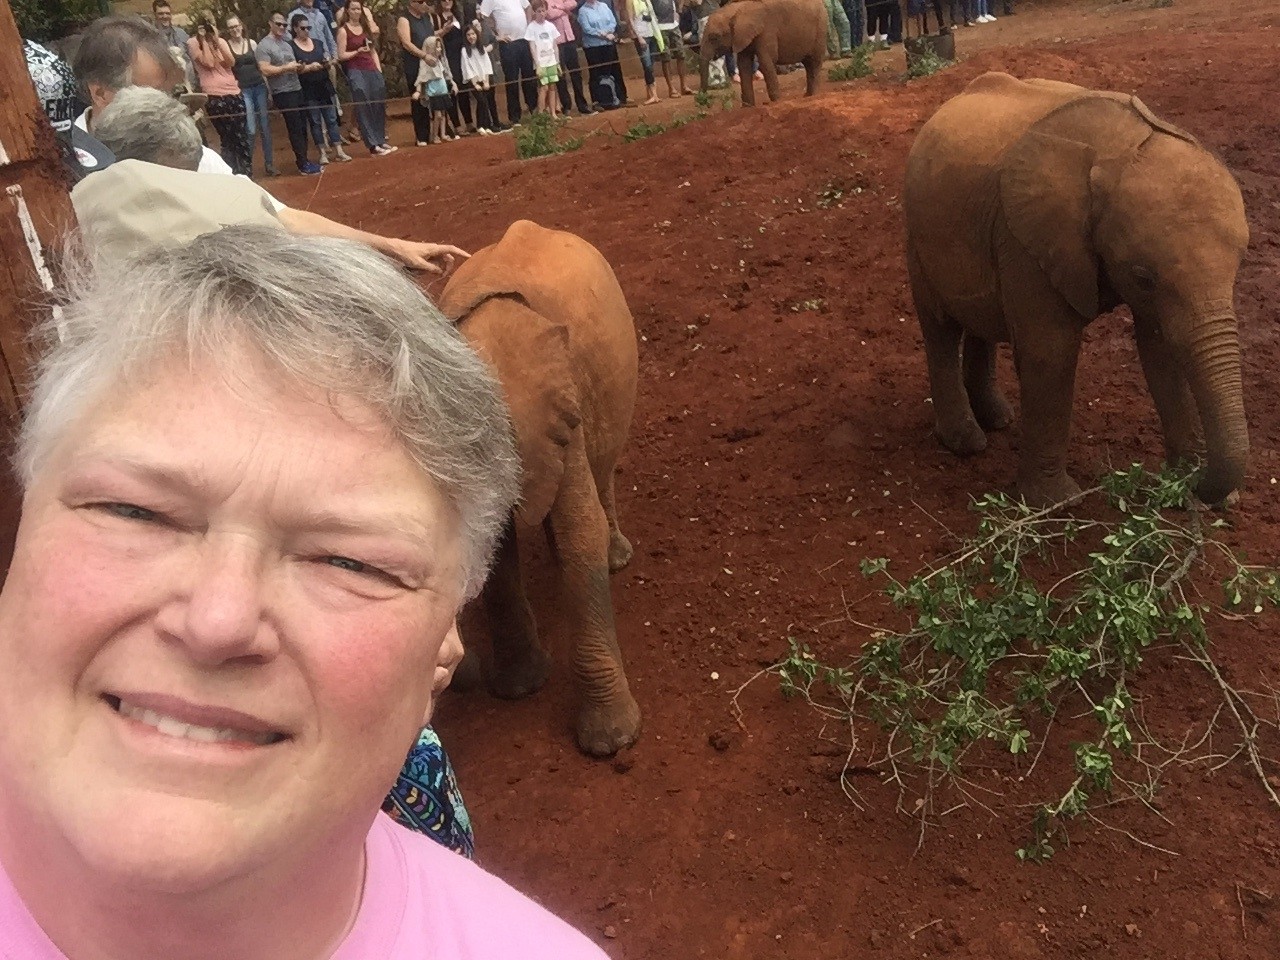 Lori taking a selfie with two baby elephants